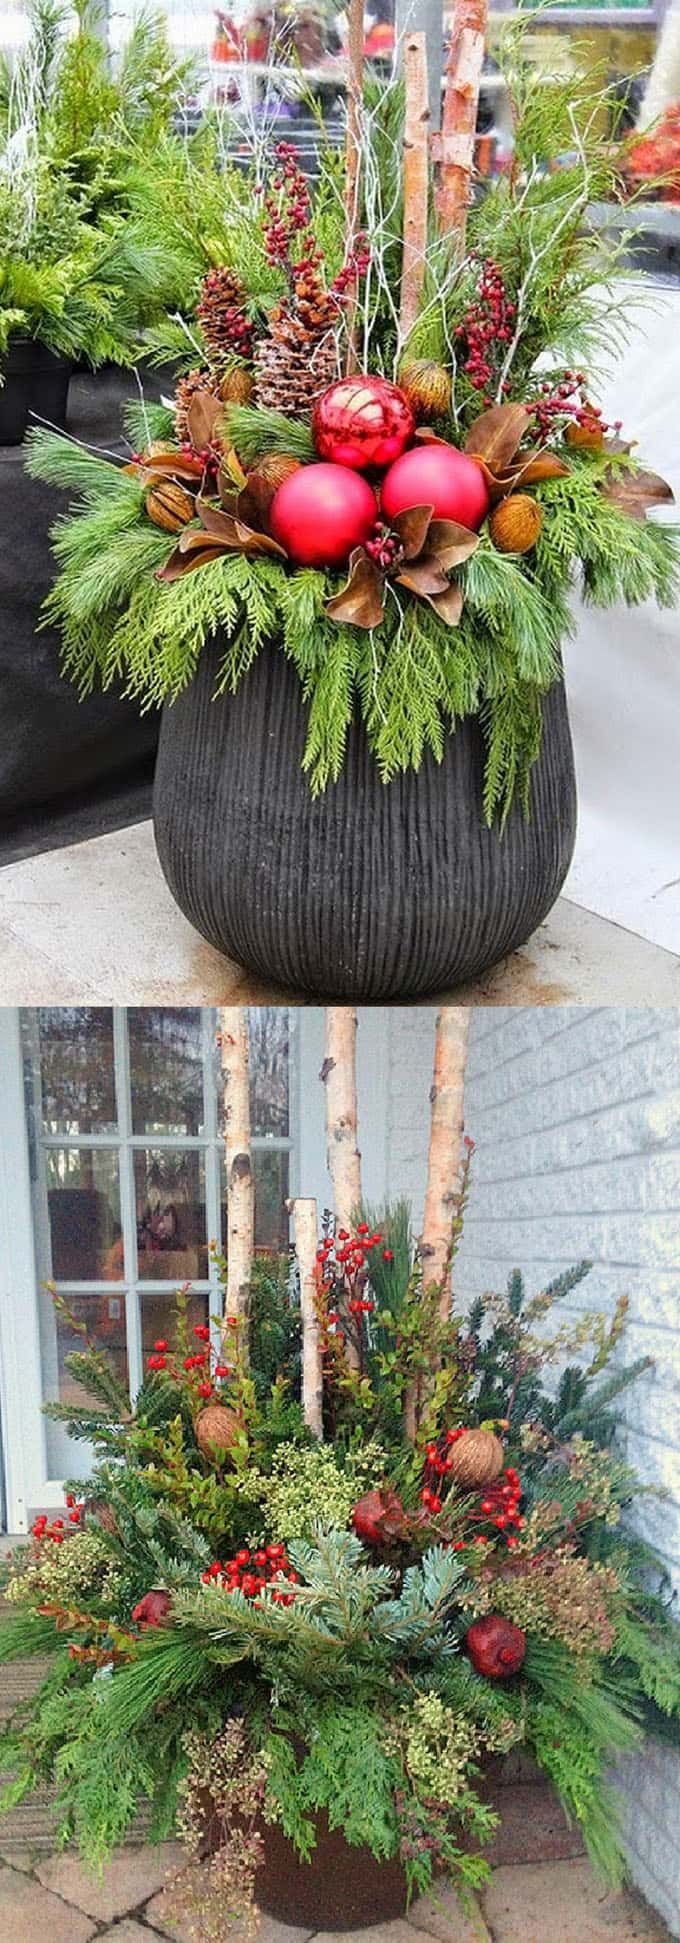 How to create colorful winter outdoor planters and beautiful Christmas planters with plant cuttings and decorative elements that